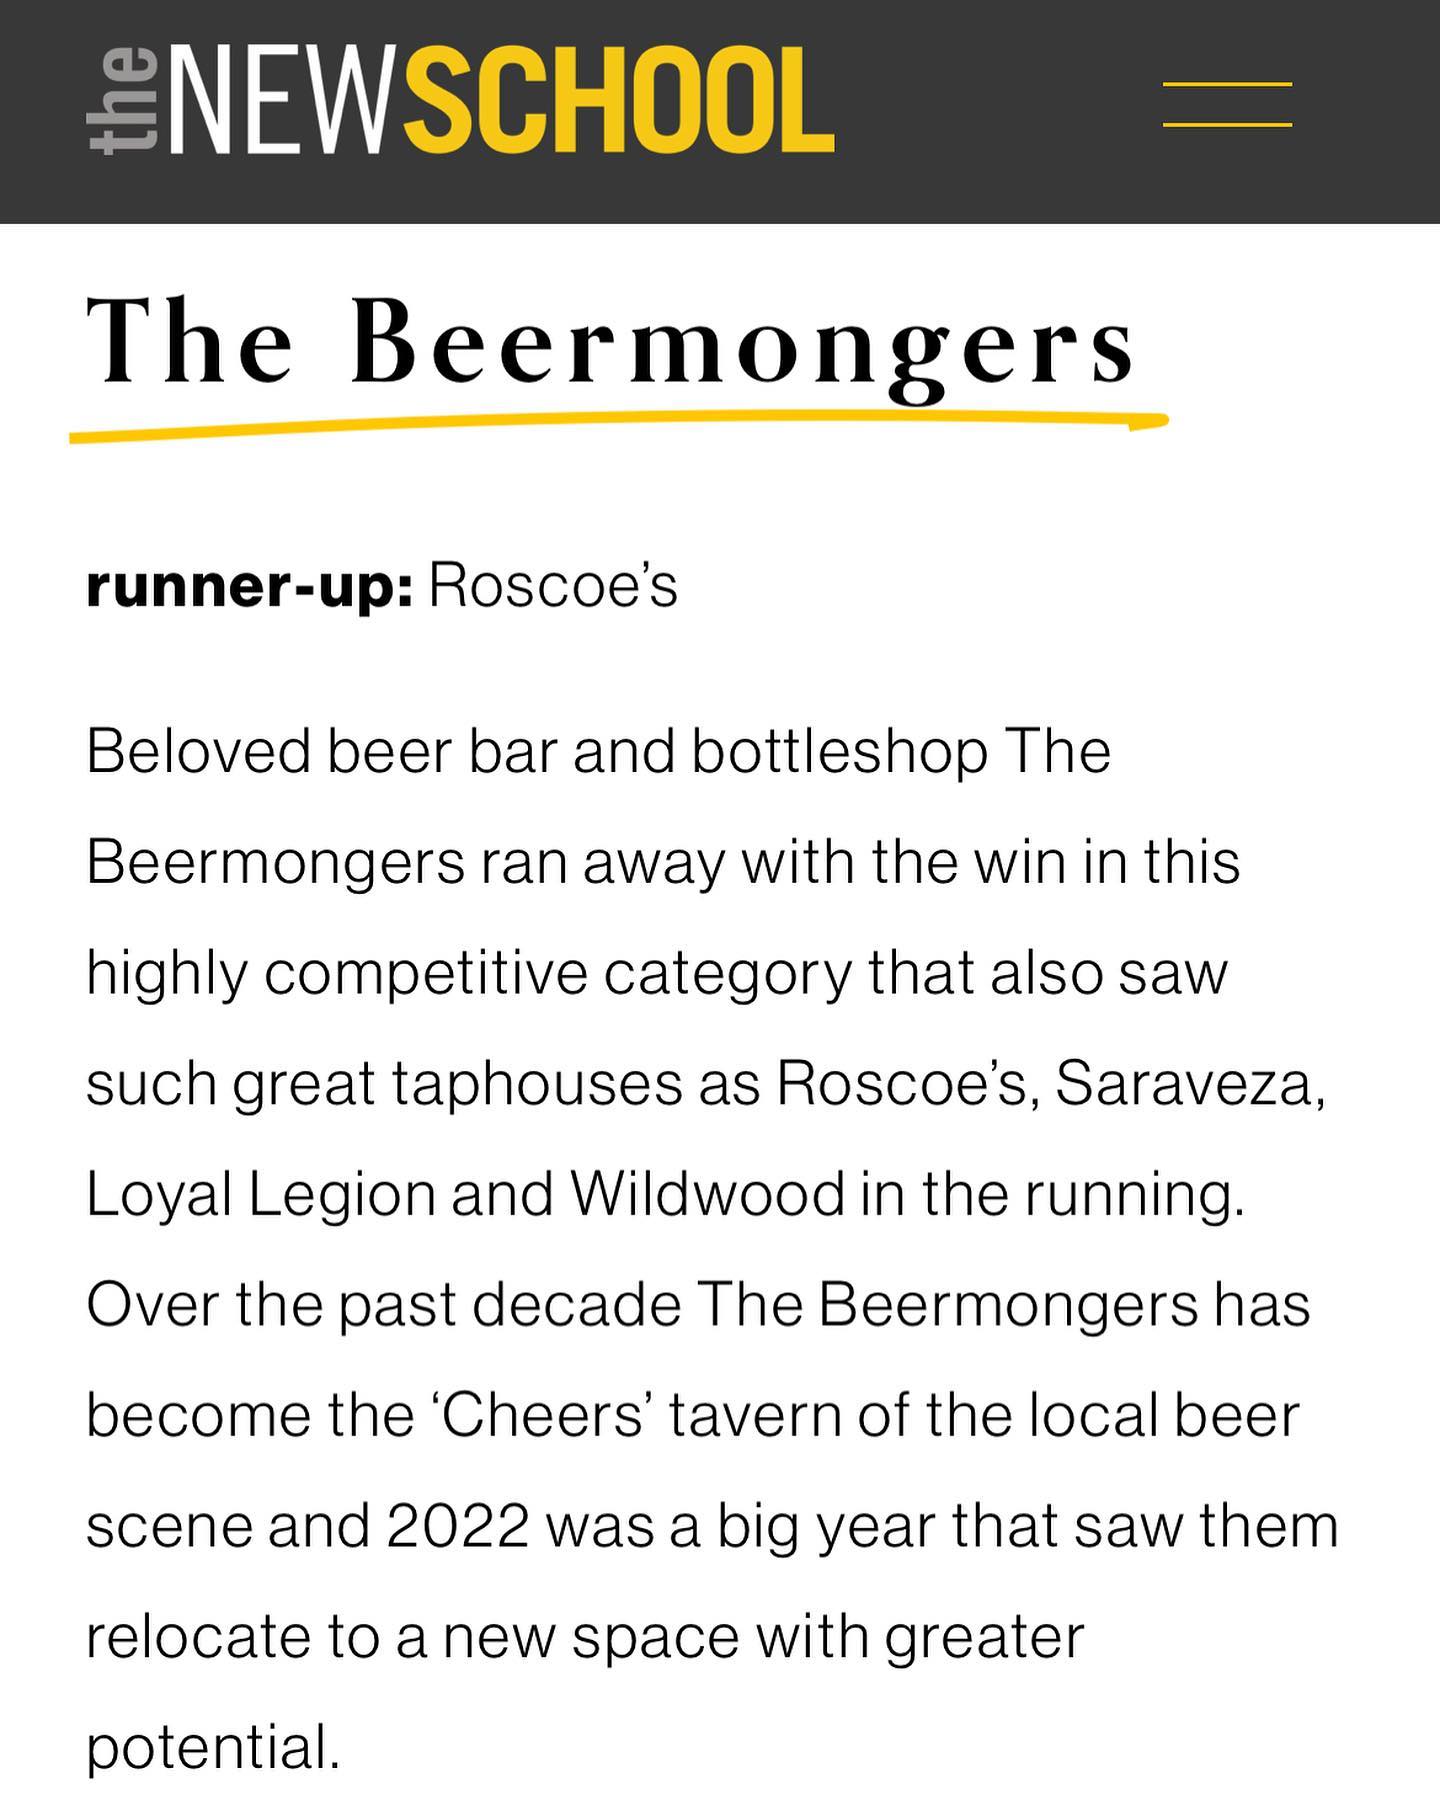 To even have our name mentioned among a few taprooms that we love and deeply respect is such an honor. Many thanks to New School Beer and cheers to BeerMongers, Roscoes, Saraveza & Loyal Legion, here’s to 2023. 🍻 
@newschoolbeer 
@thebeermongers 
@roscoespdx 
@loyallegionoregon 
@saravezapdx 
.
.
.
.
#wildwoodtaphouse #wildwoodtap #newschoolbeer #beermongers #roscoespdx #saraveza #loyallegion #craftbeer #oregonbeer #twoisaparty